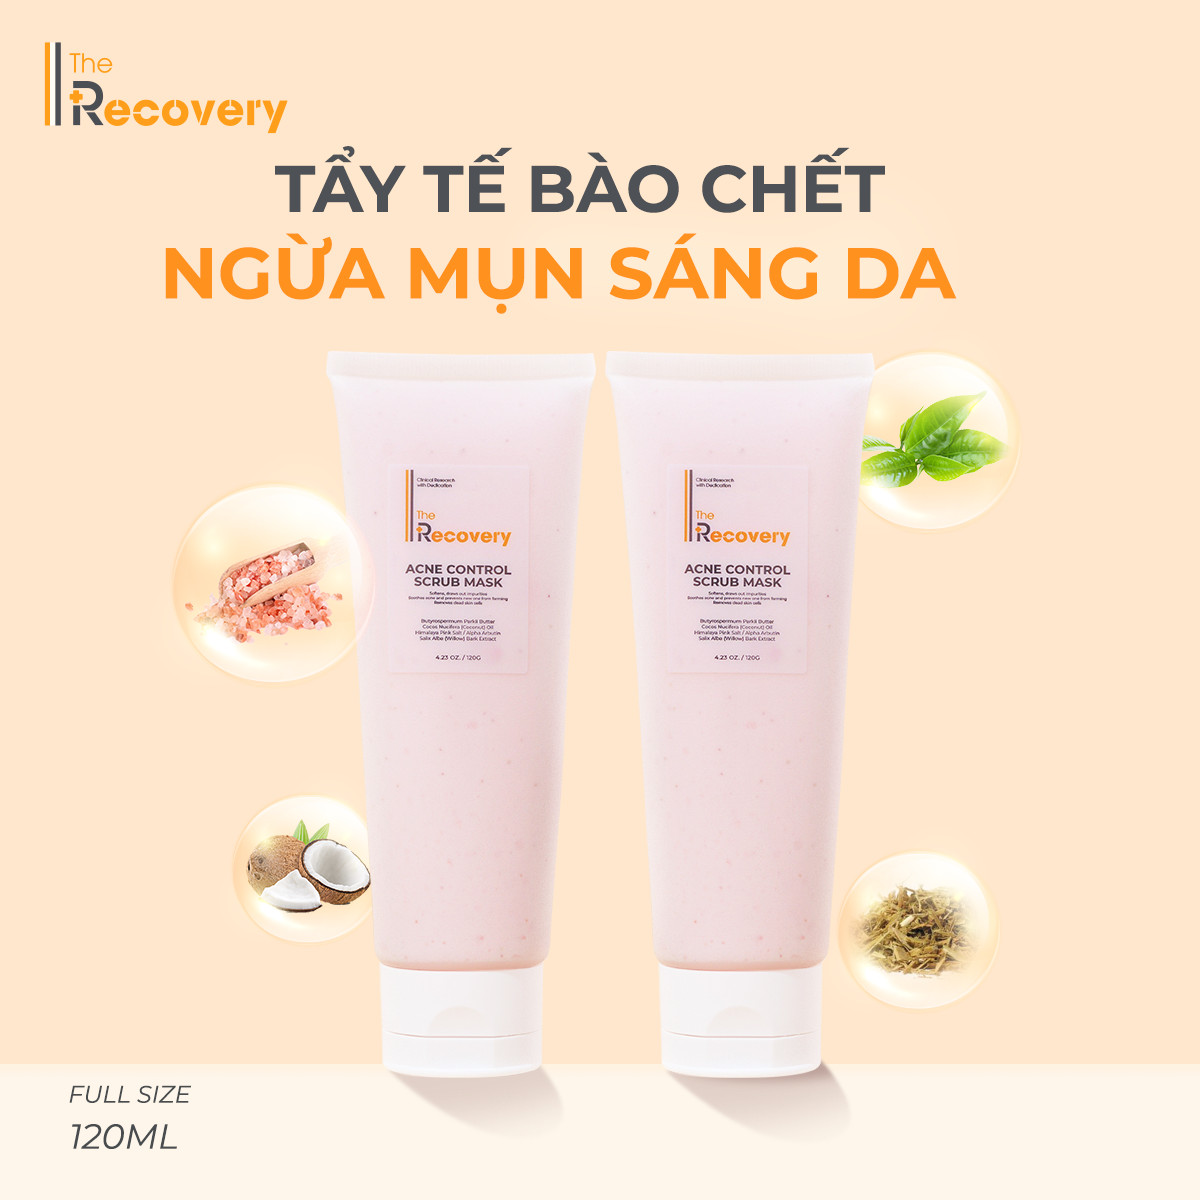 The recovery - acne control scrub mask